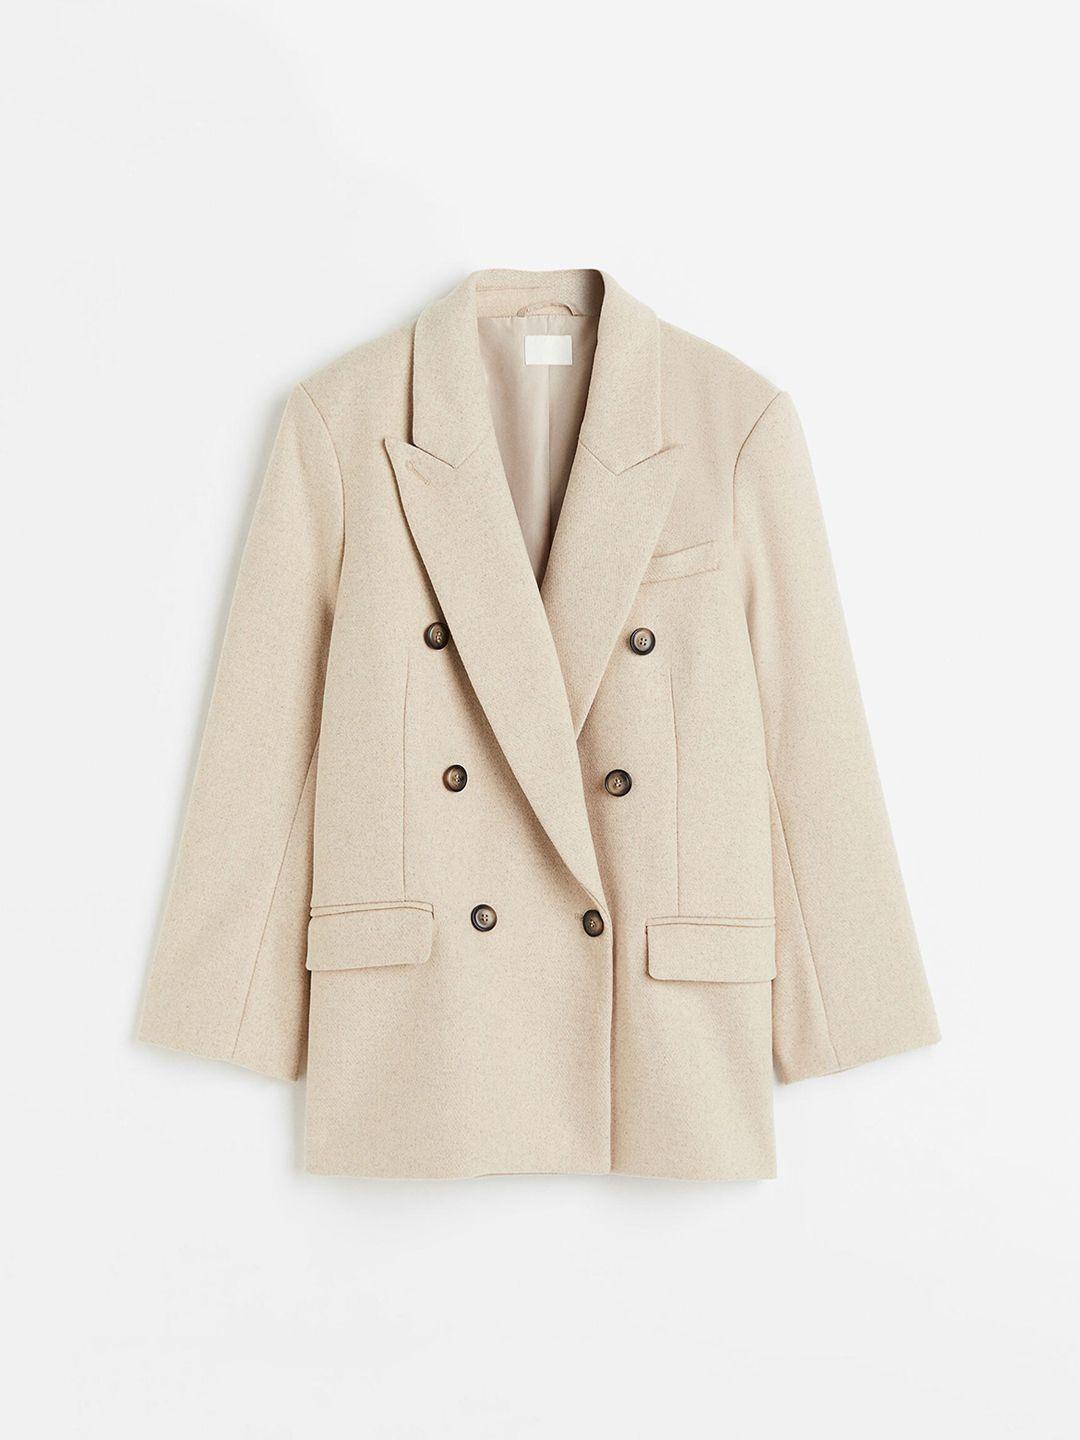 h&m double-breasted blazer